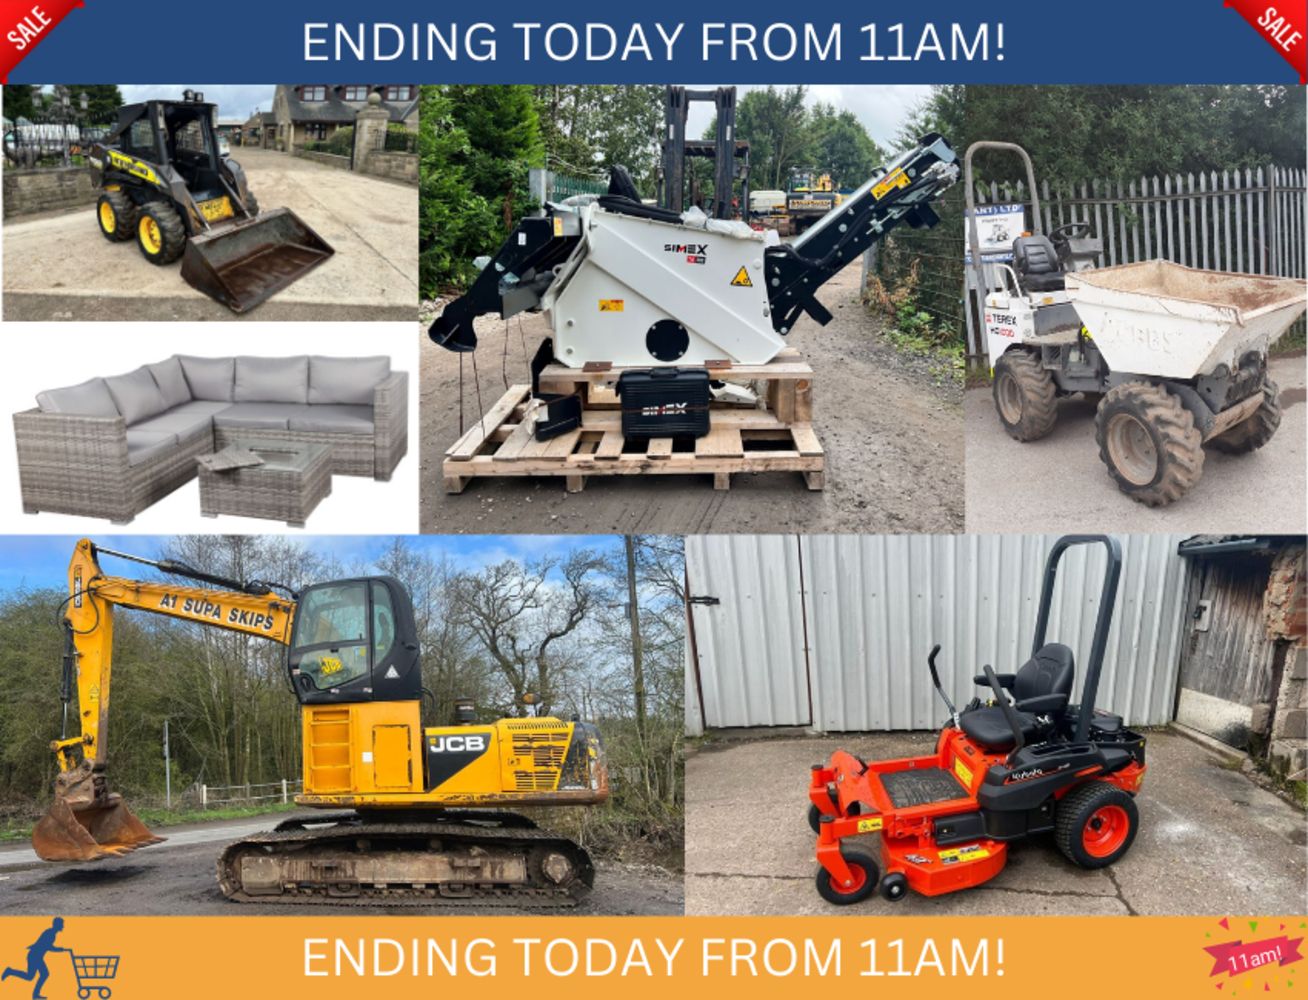 11AM FRIDAY MORNING SALE! INCLUDES TARMAC PLANER, 14TON EXCAVATOR, SCARAB SWEEPER, LAND ROVER, DUMPERS, DIGGER, FORKLIFTS & MORE